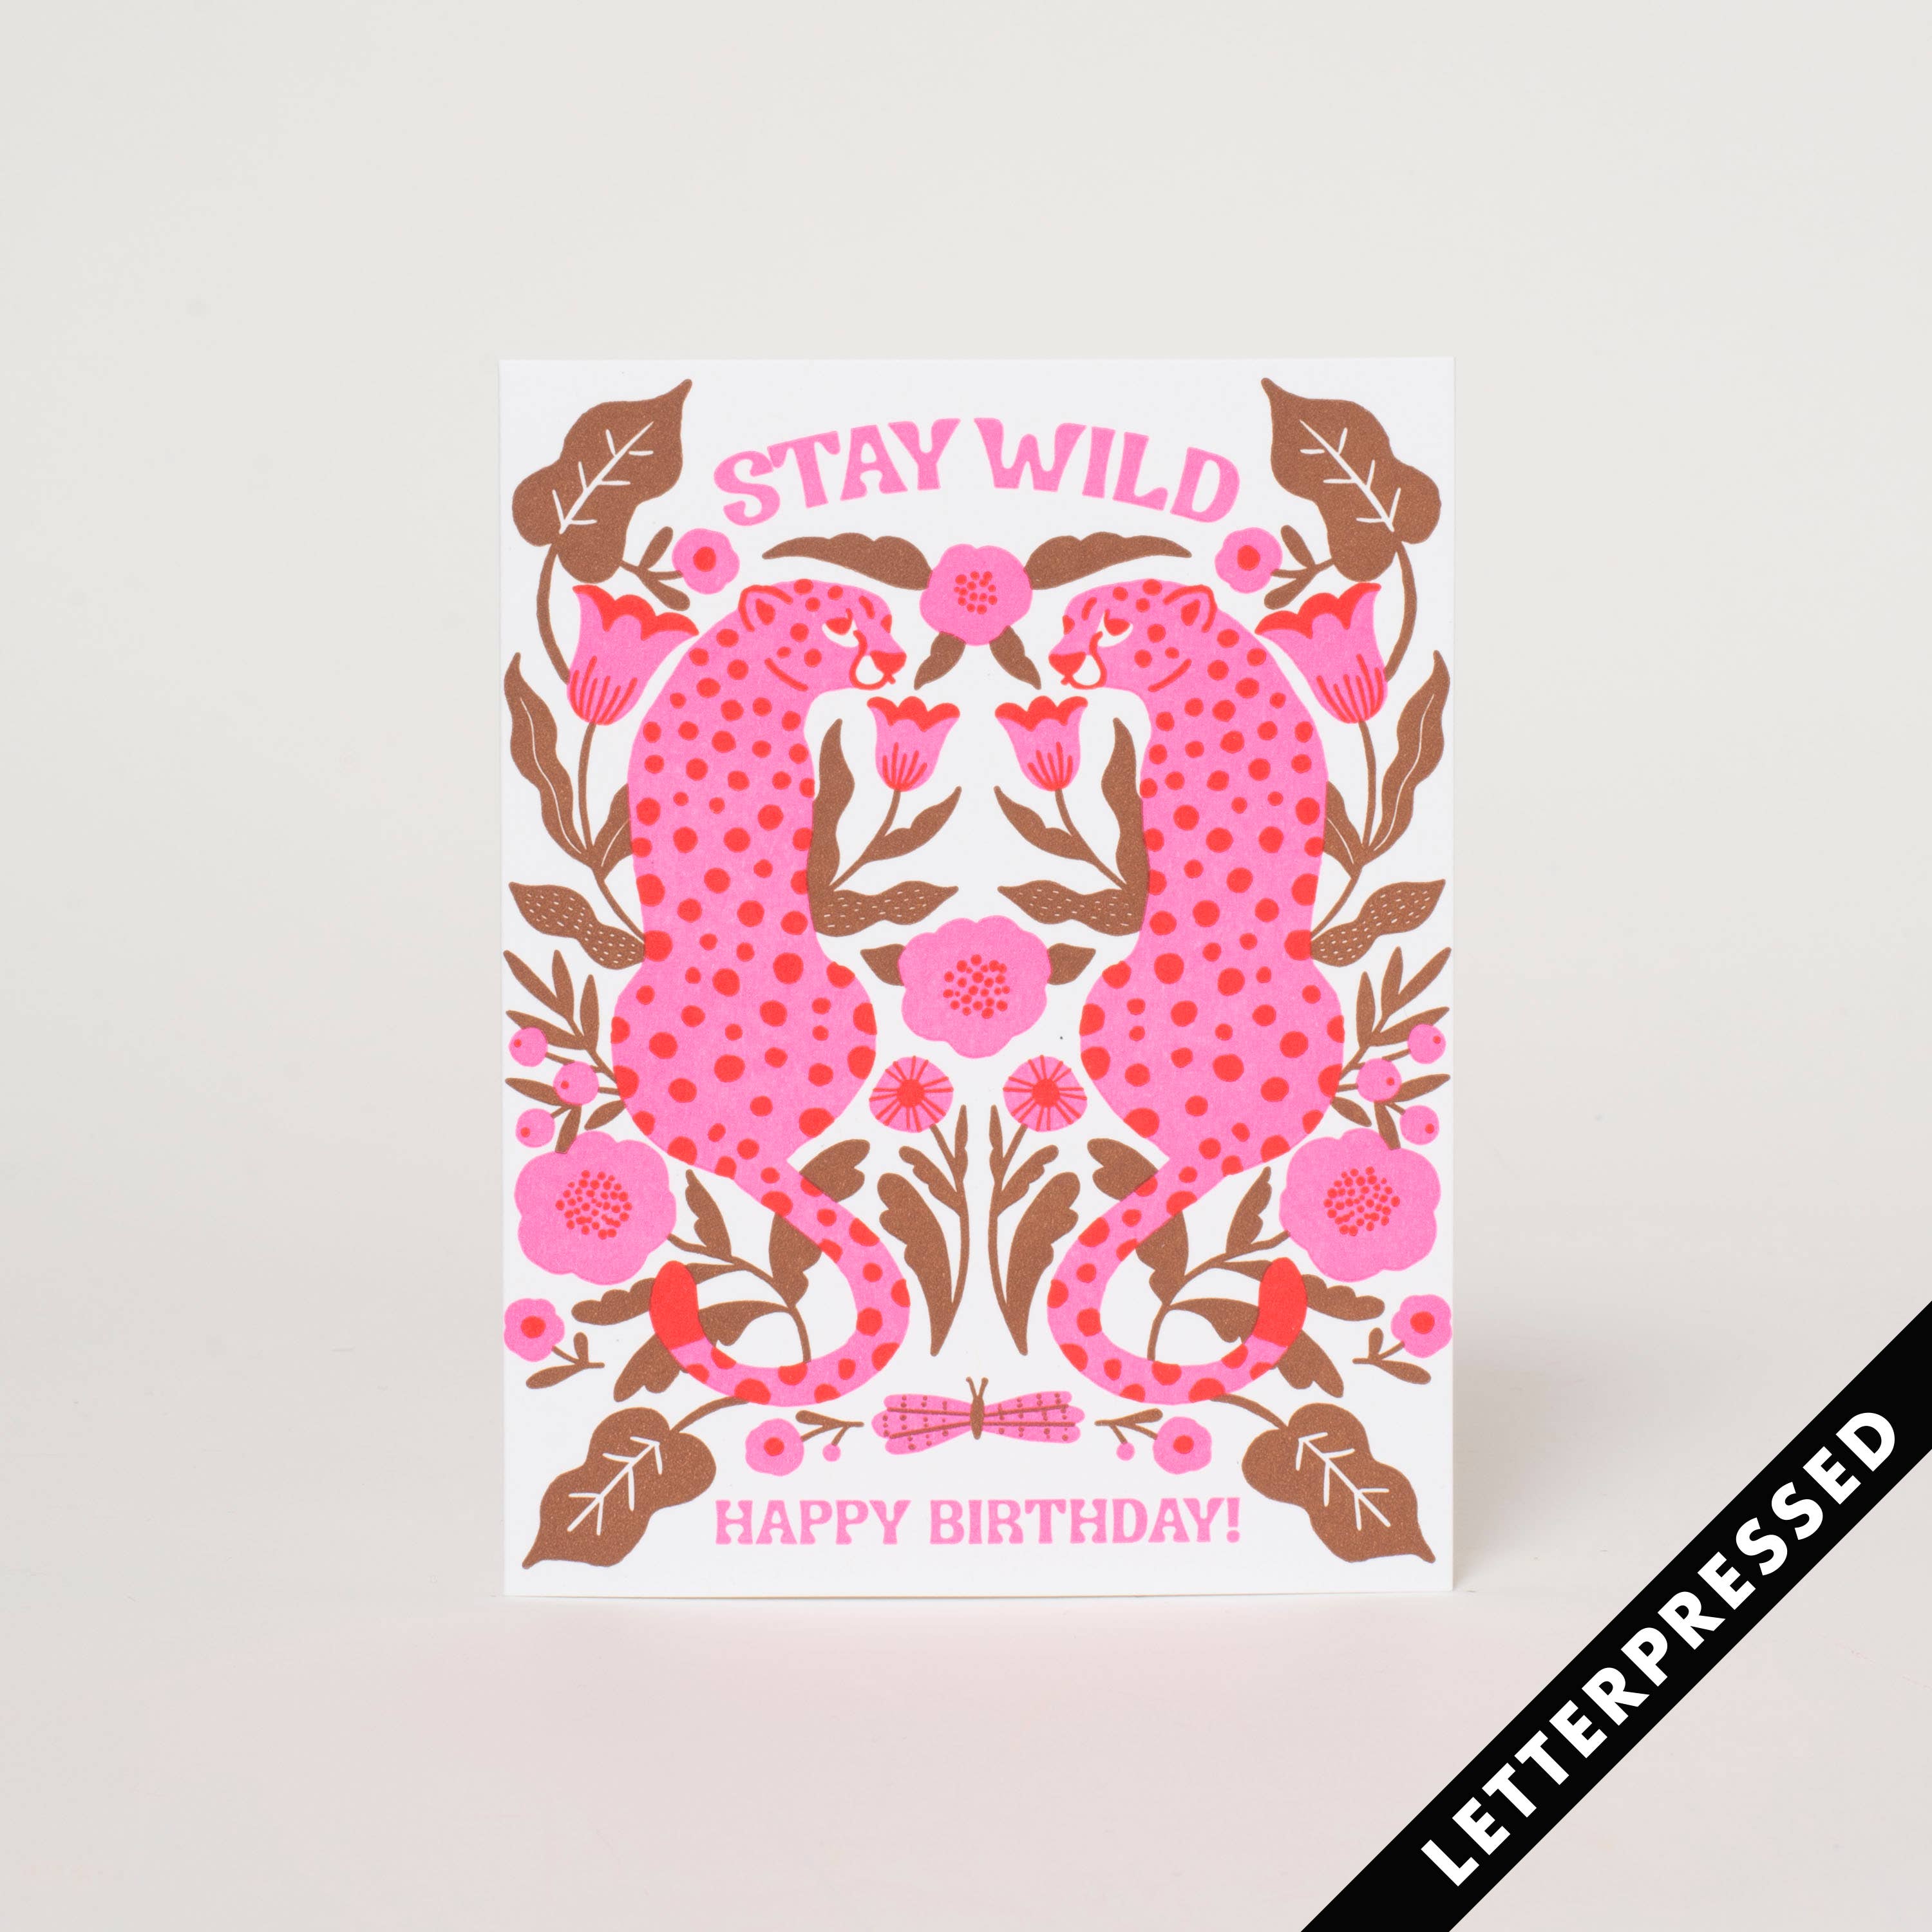 Egg Press Manufacturing - HELLO! LUCKY -- Stay Wild Birthday: Paper tab